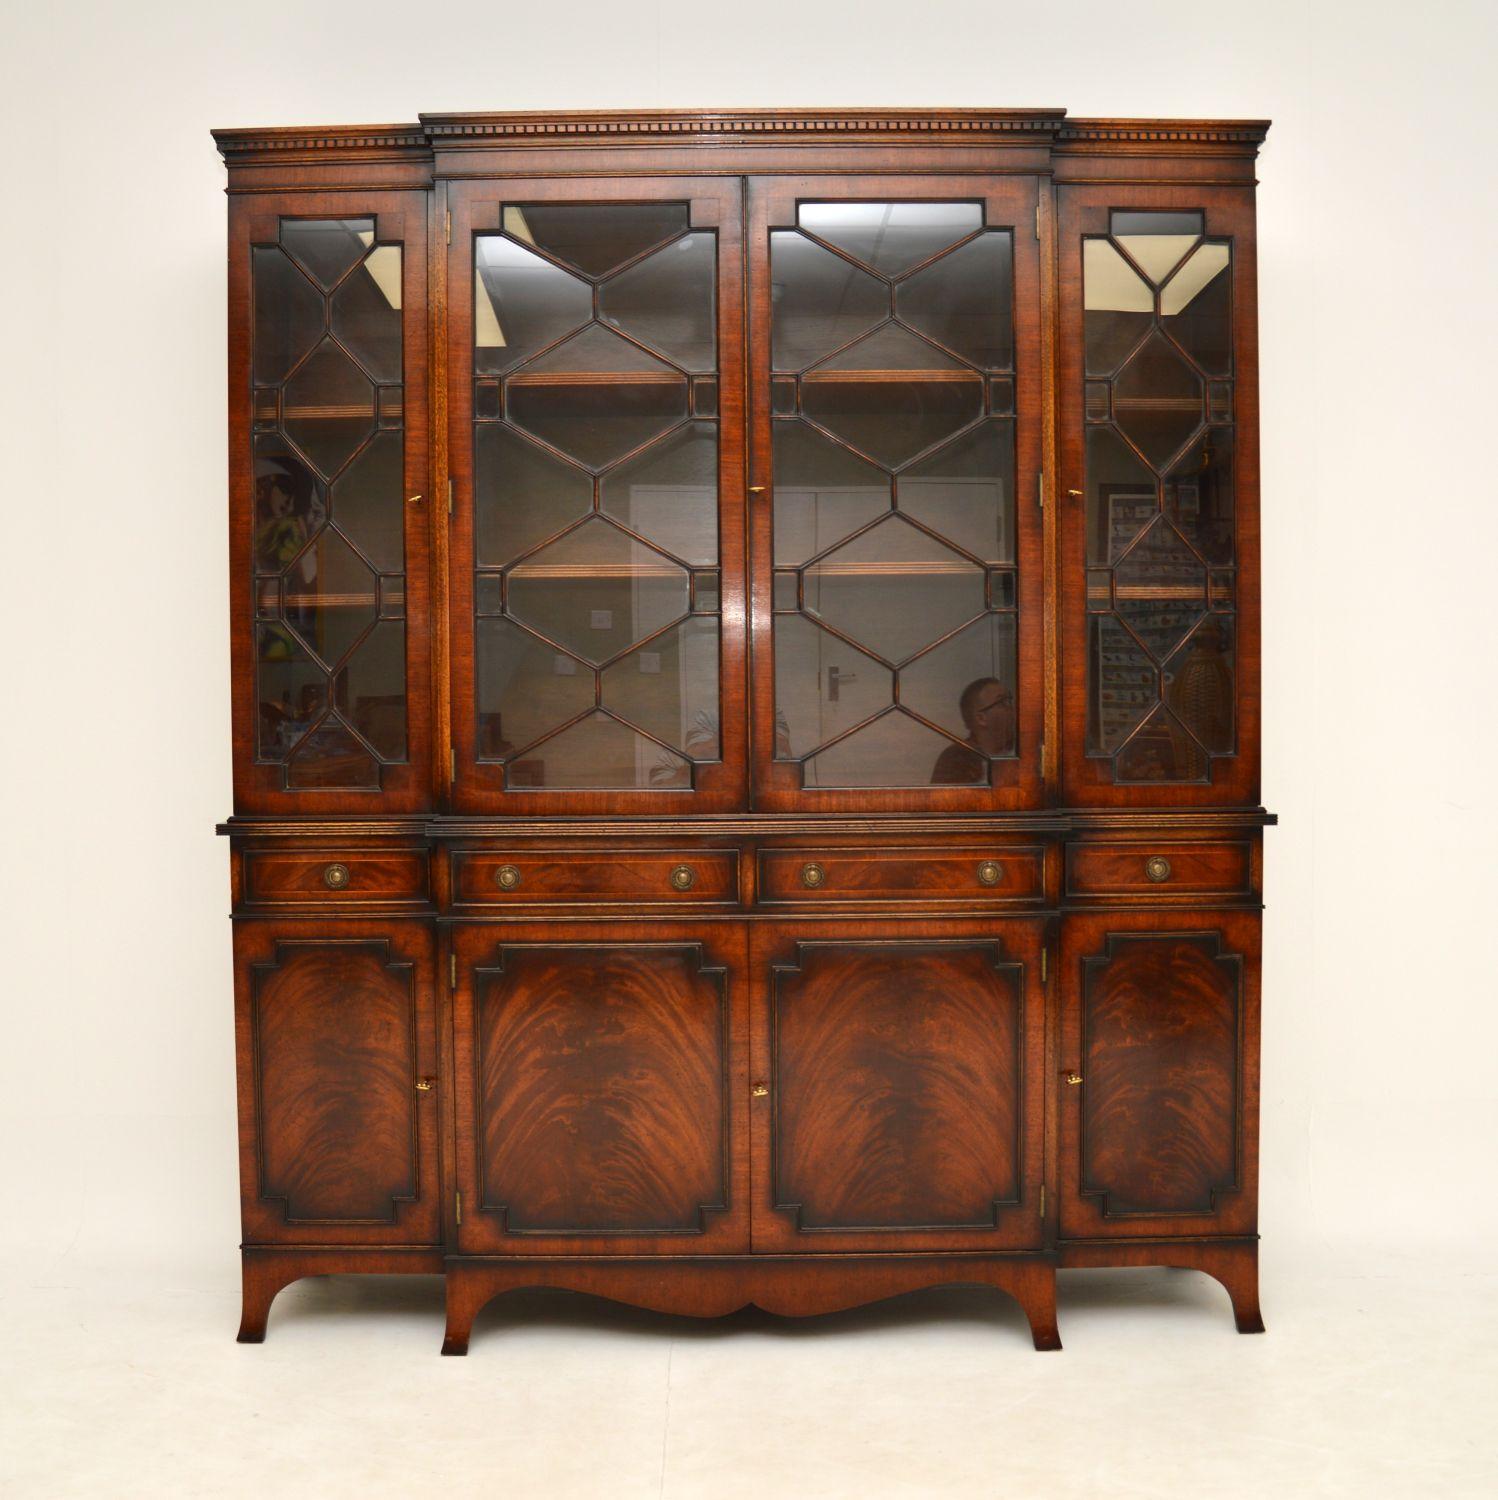 This beautiful antique breakfront mahogany bookcase has plenty of character. This is in the Georgian style & dates from around the 1920-30’s.

The quality is outstanding and it has lovely proportions. This sits on splayed bracket feet, the lower